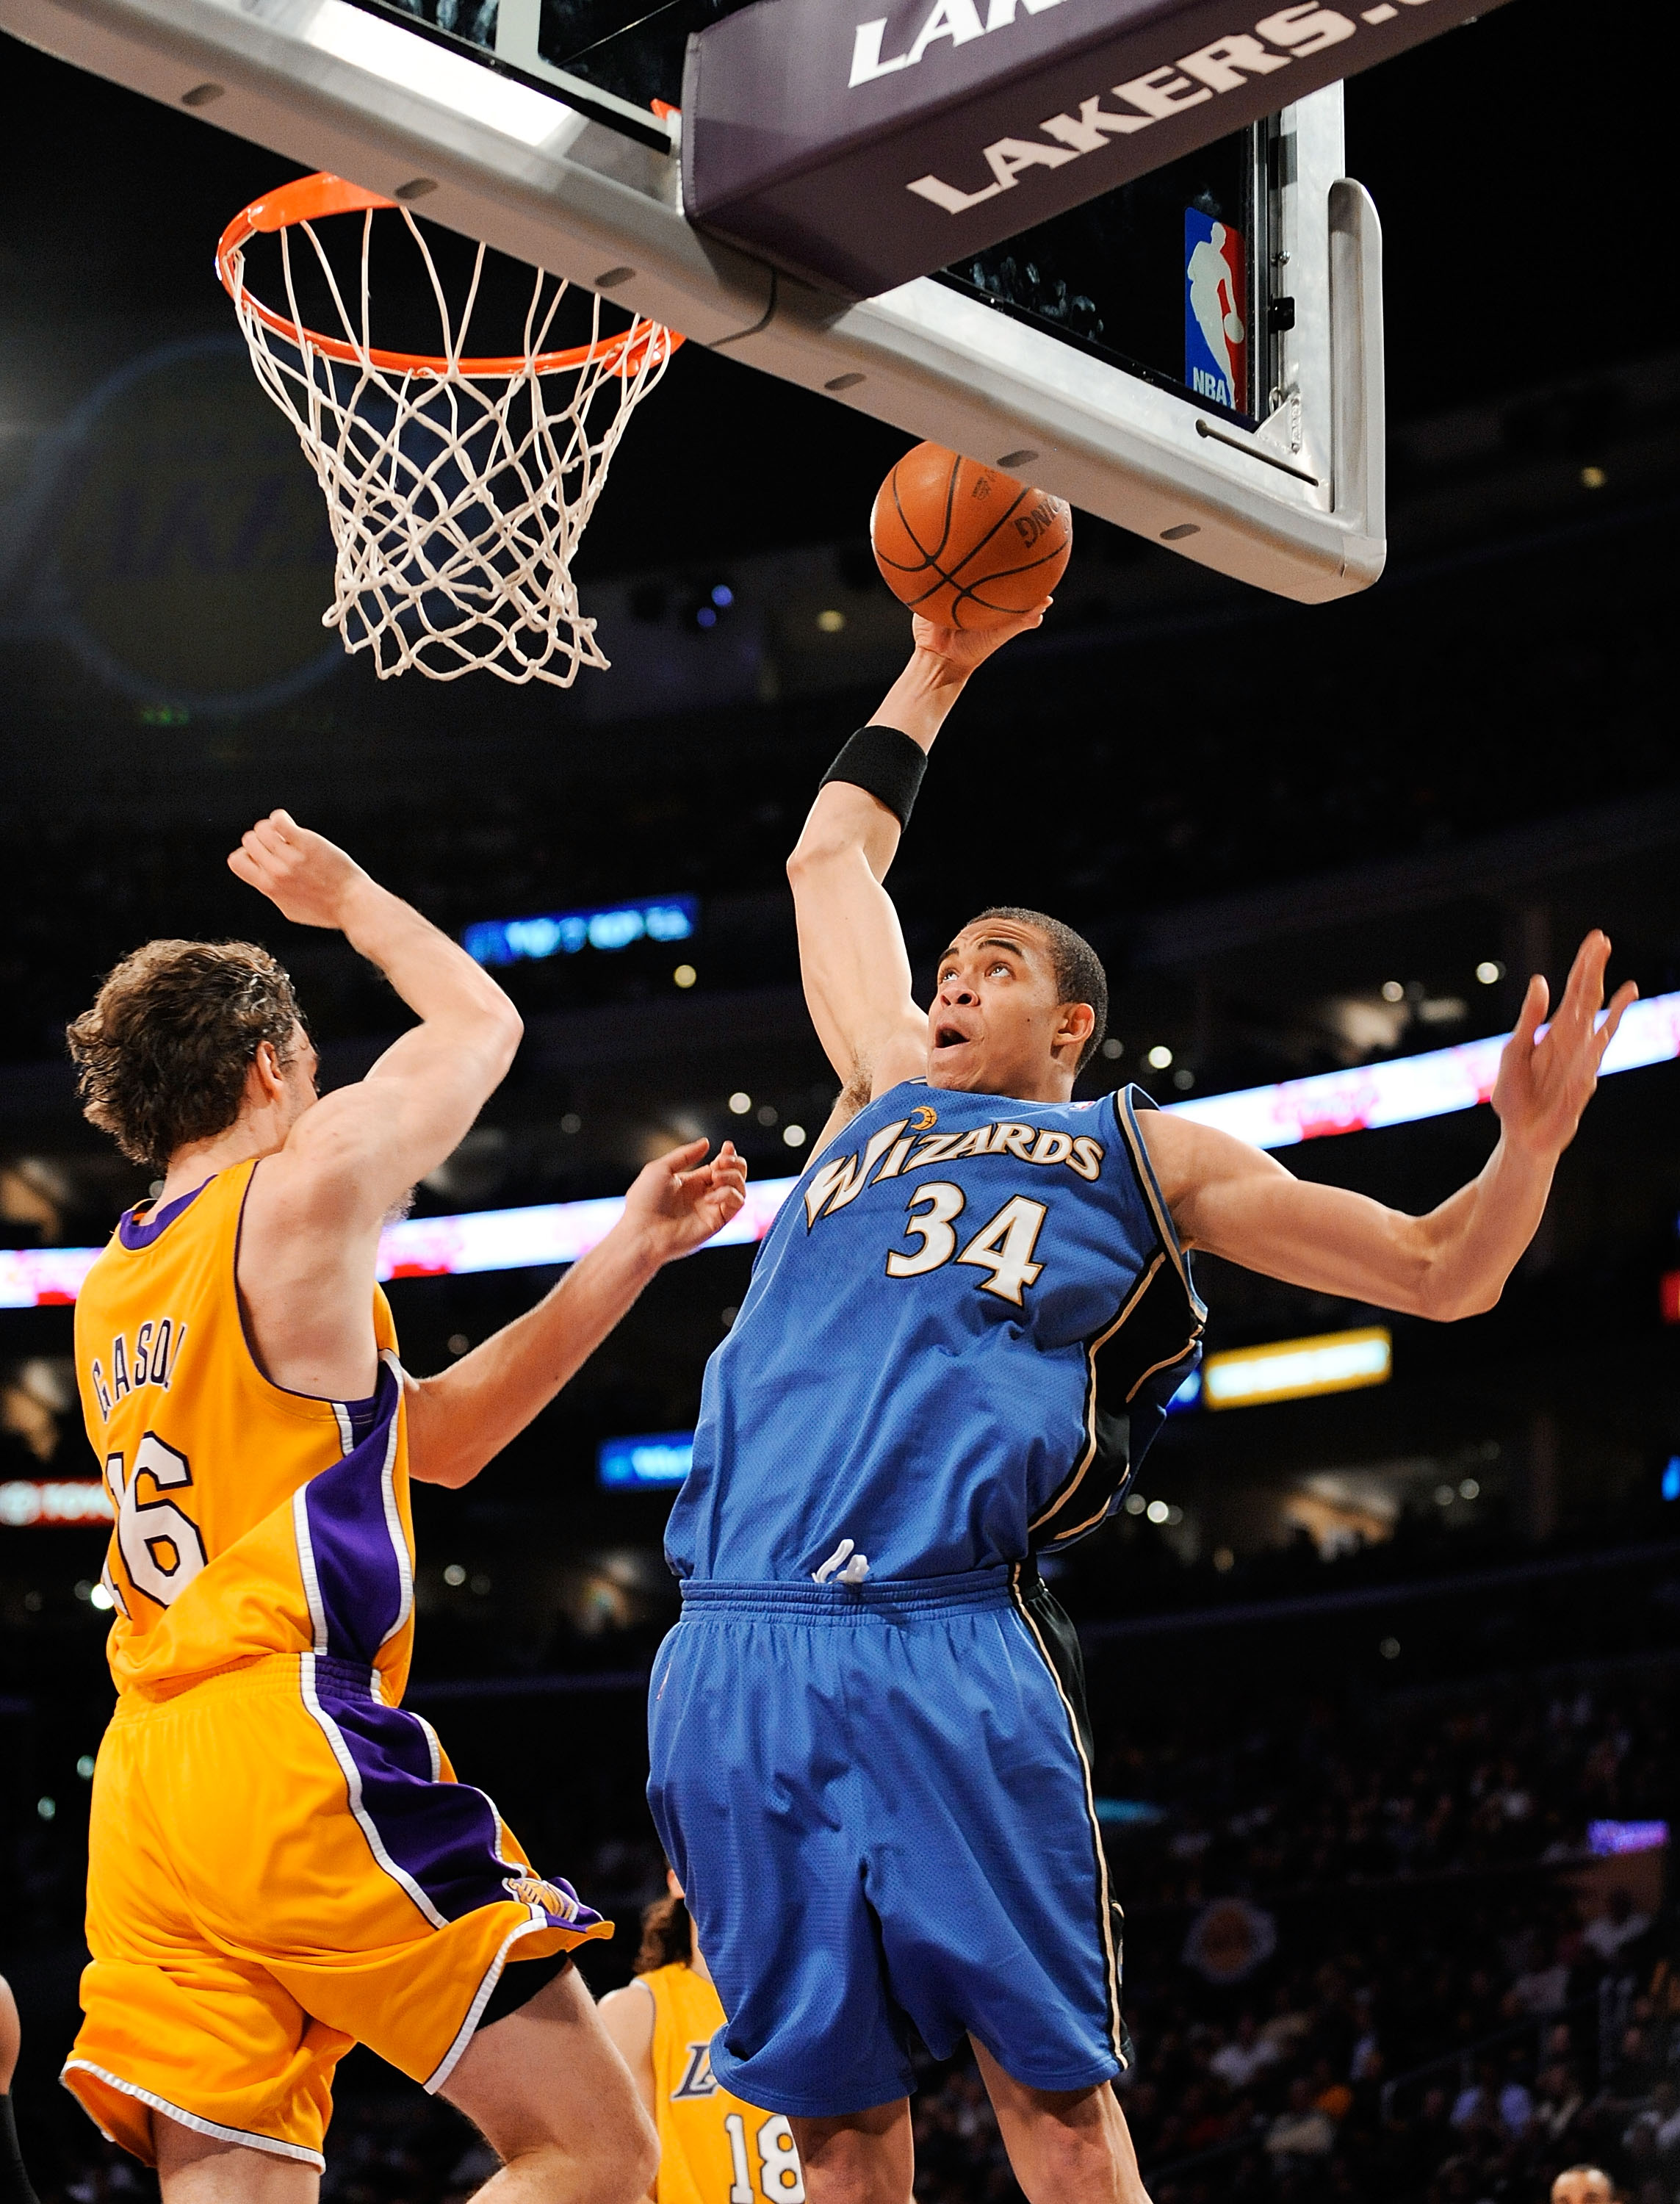 LOS ANGELES, CA - JANUARY 22: JaVale McGee #34 of the Washington Wizards slams the ball against Pau Gasol of the Los Angeles Lakers during the second quarter at the Staples Center January 22, 2009 in Los Angeles, California. NOTE TO USER: User expressly a